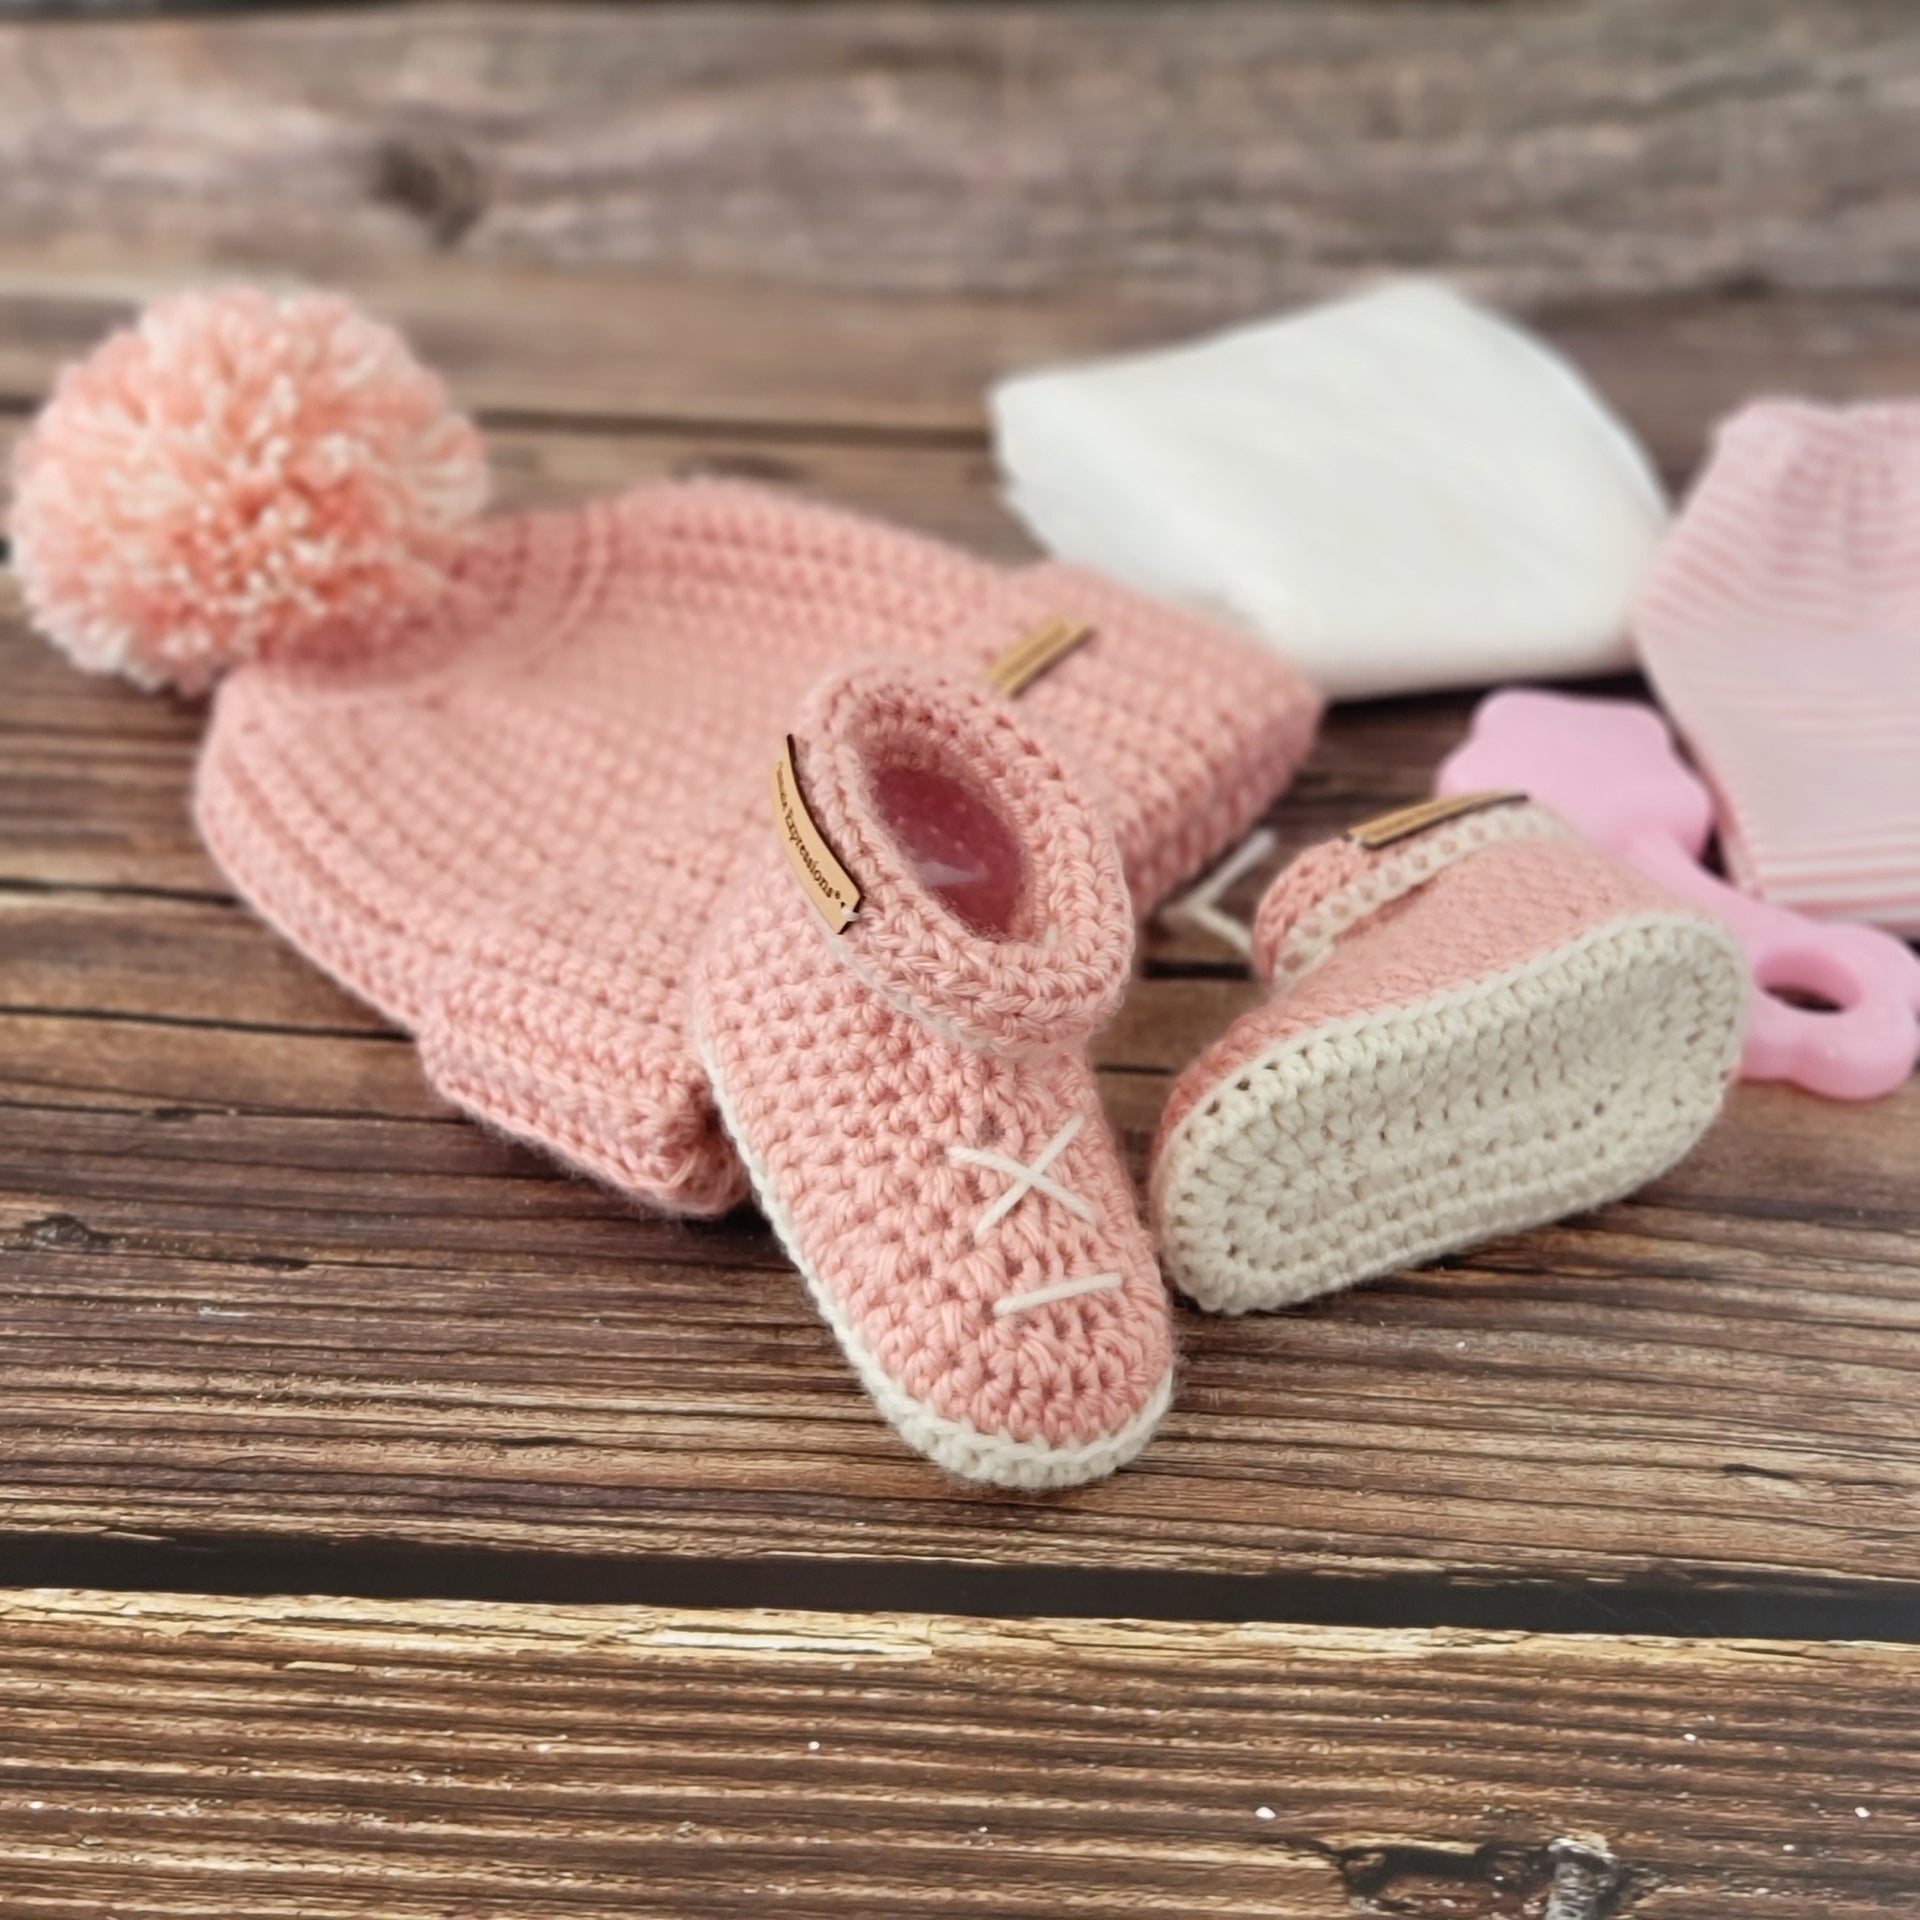 Bespoke Order: 'Peachy Swirl' Baby Gift Set - Booties & Beanie - 3 to 6 months - Made to Order